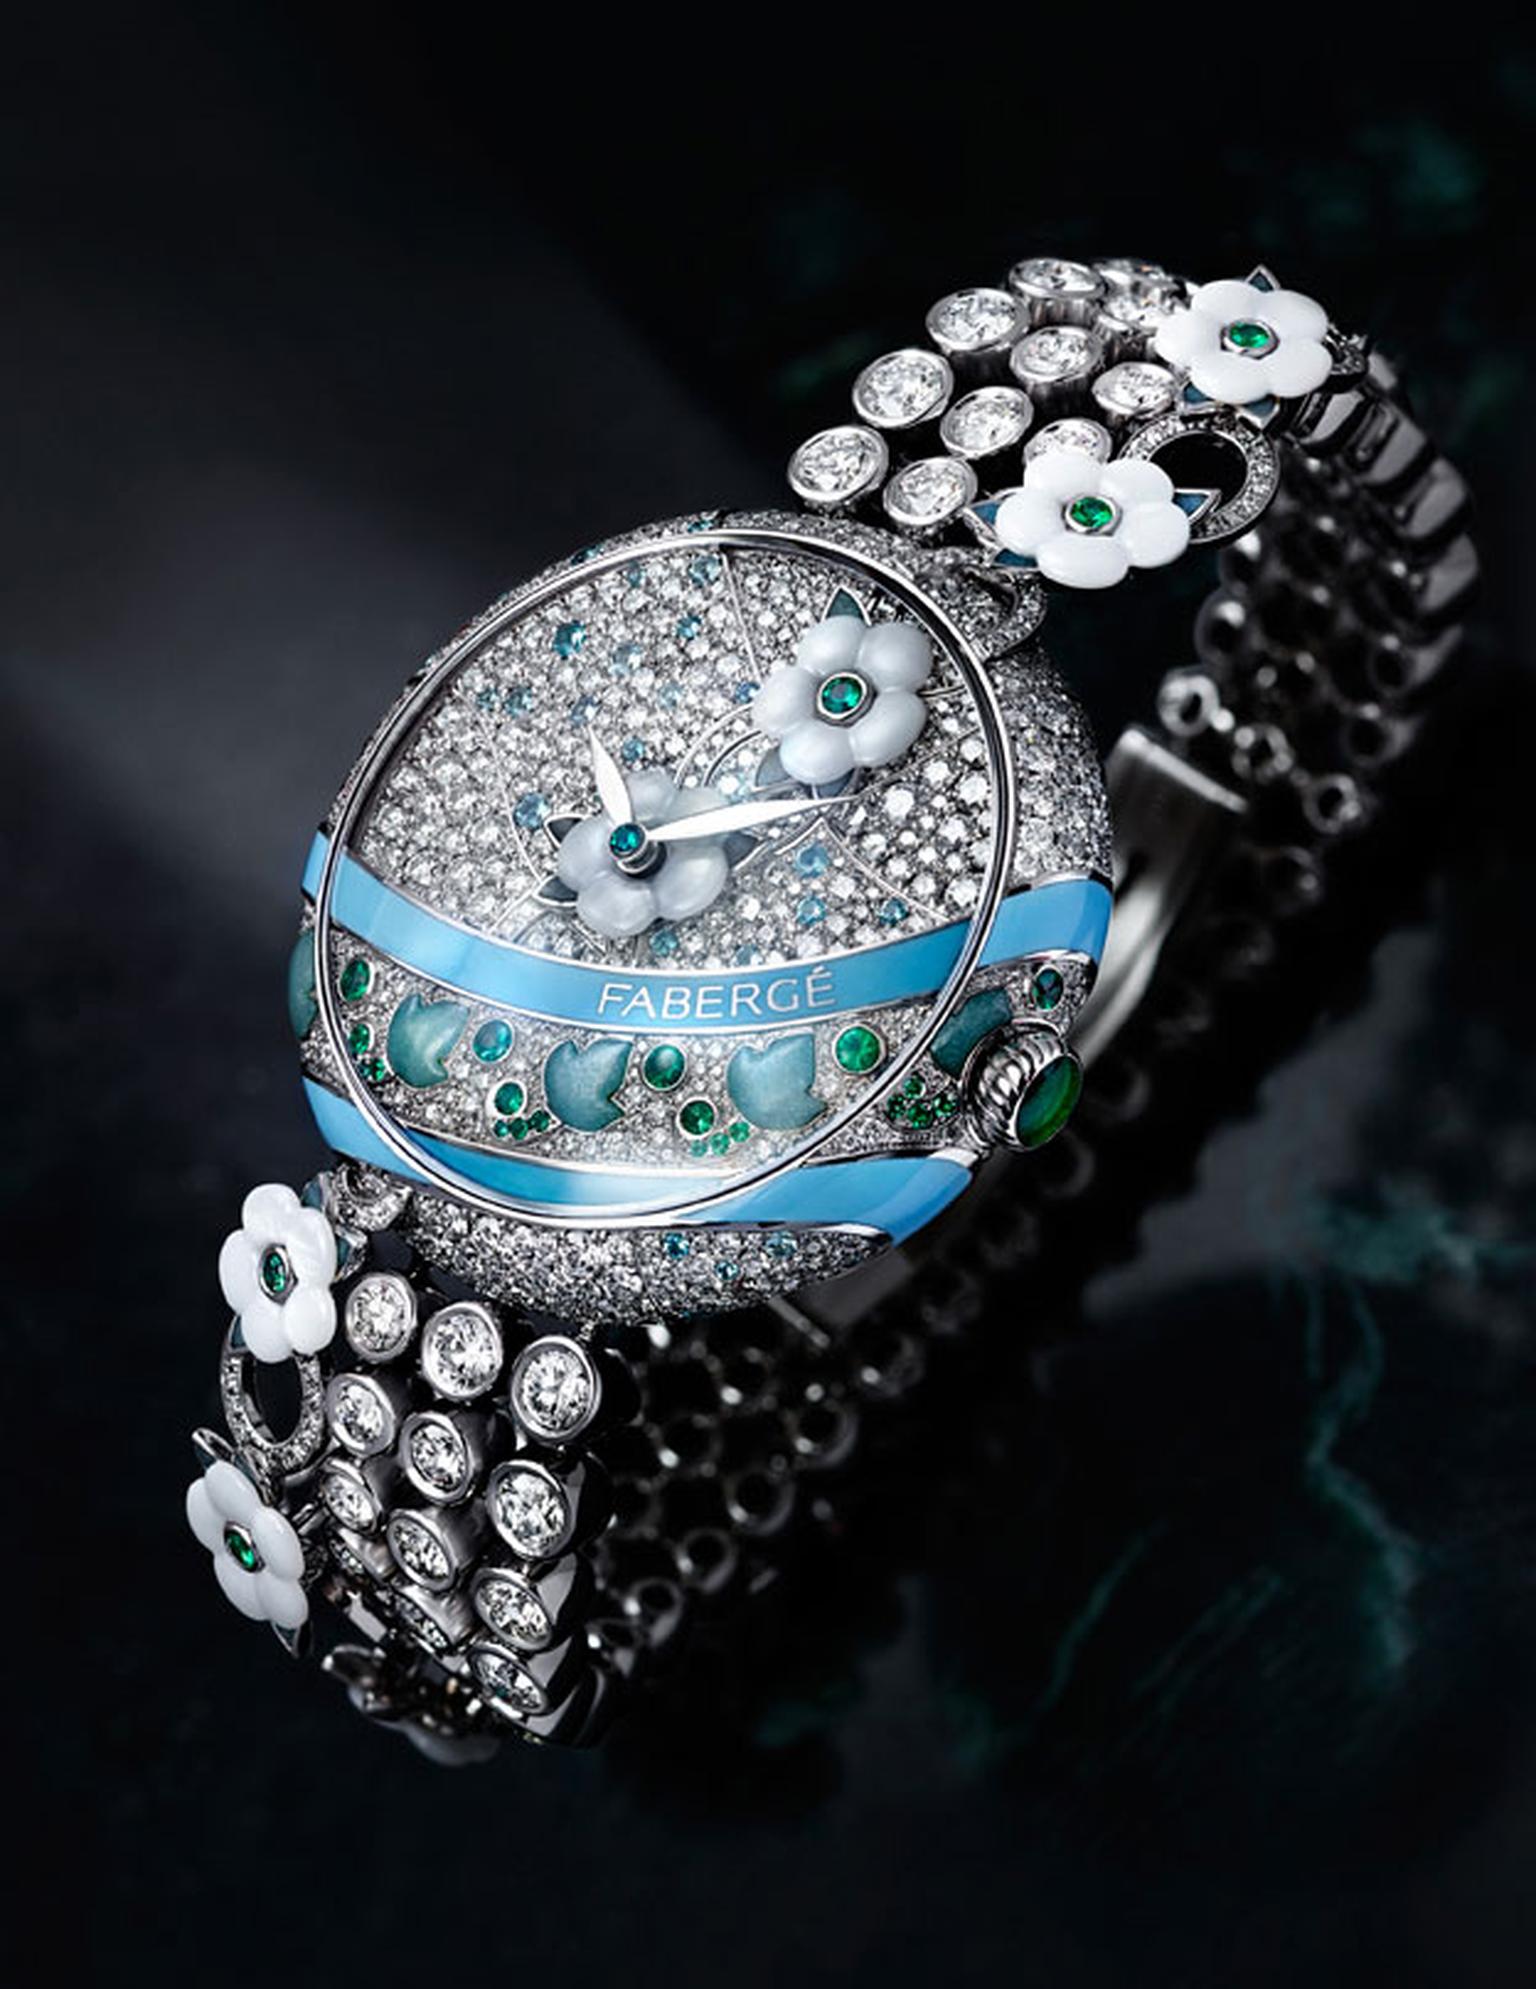 Baselworld-high-jewellery-watches_Faberge-Summer-in-Provence_side.jpg